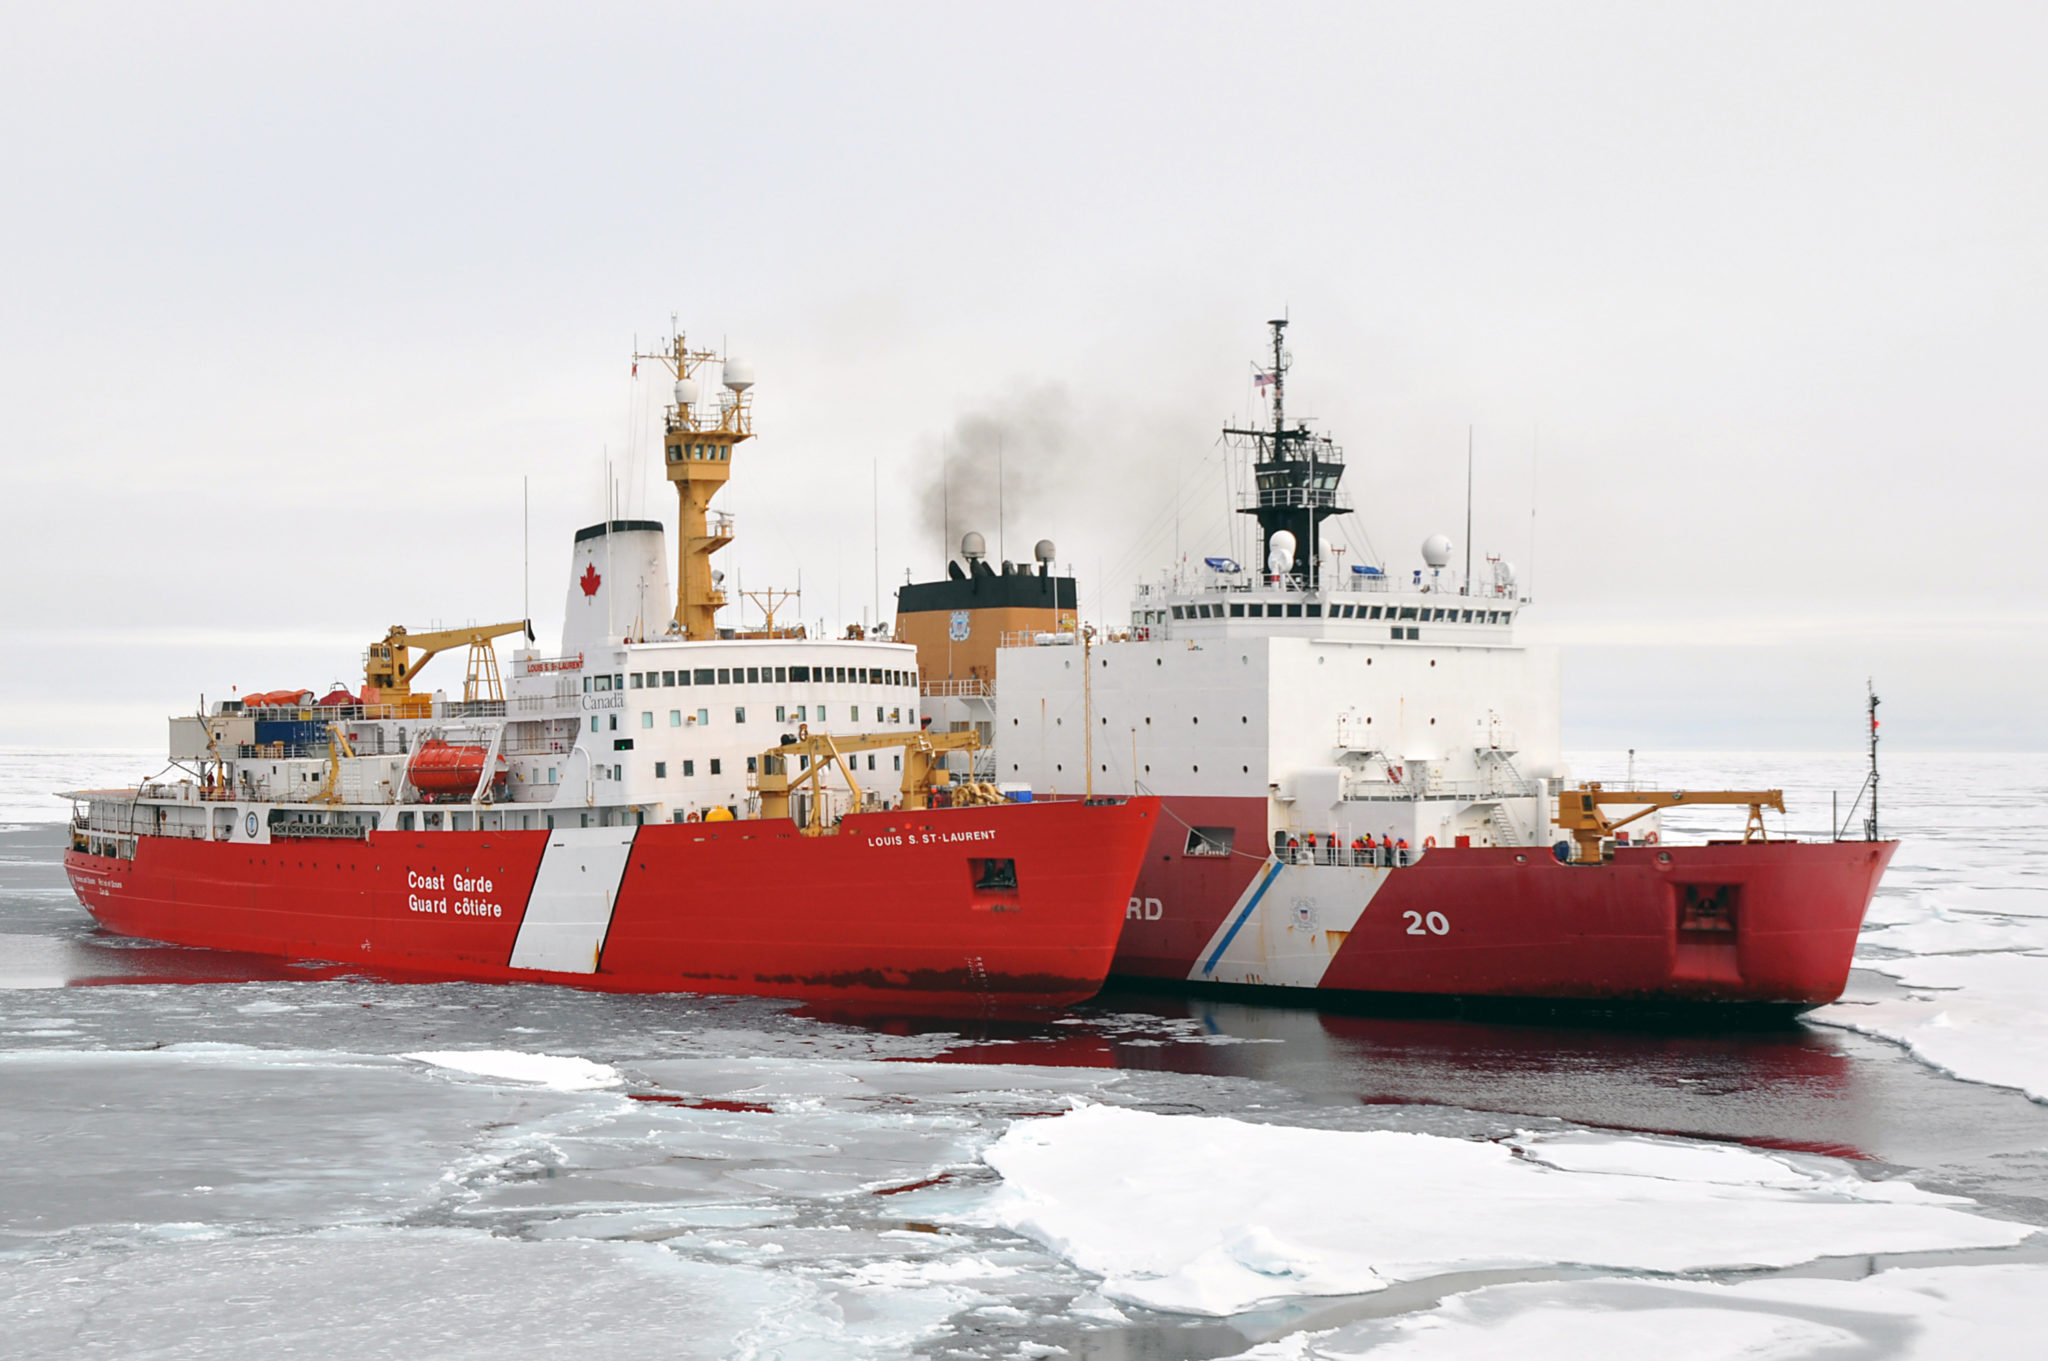 <p>Icebreakers in the Arctic continue to use the most harmful marine fuels that cause air pollution and accelerate global warming (Image: <a href="https://commons.wikimedia.org/wiki/File:Icebreakers_CCGS_Louis_S._St-Laurent_and_USCGC_Healy_on_a_joint_exercise_in_the_Arctic_-a.jpg">Wikimedia</a>)</p>
<p>&nbsp;</p>